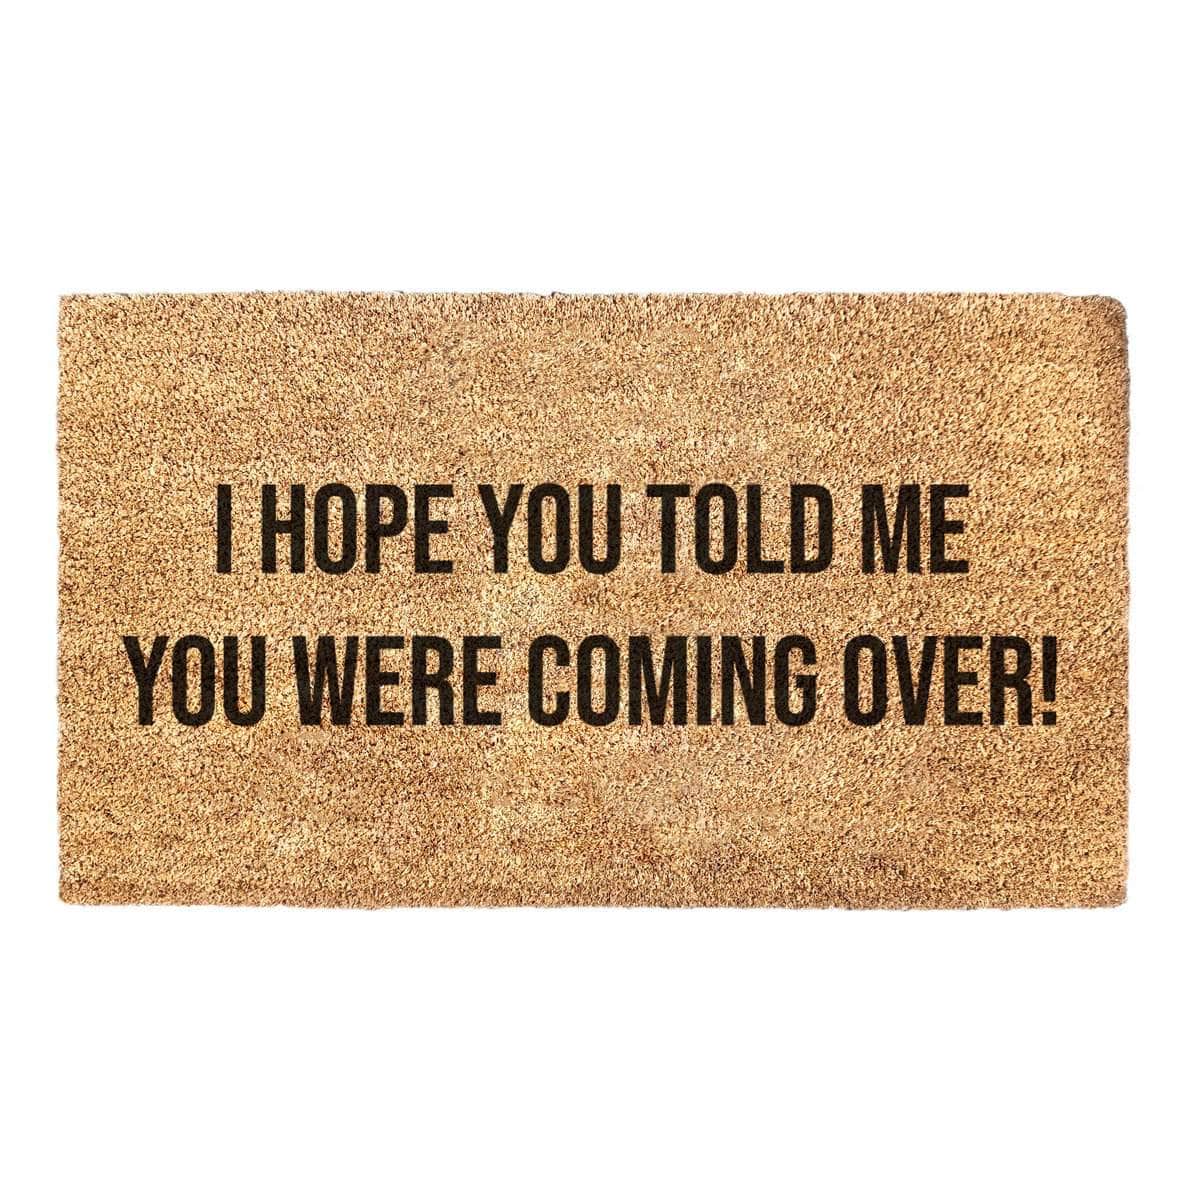 I Hope You Told Me You Were Coming Over! - Doormat